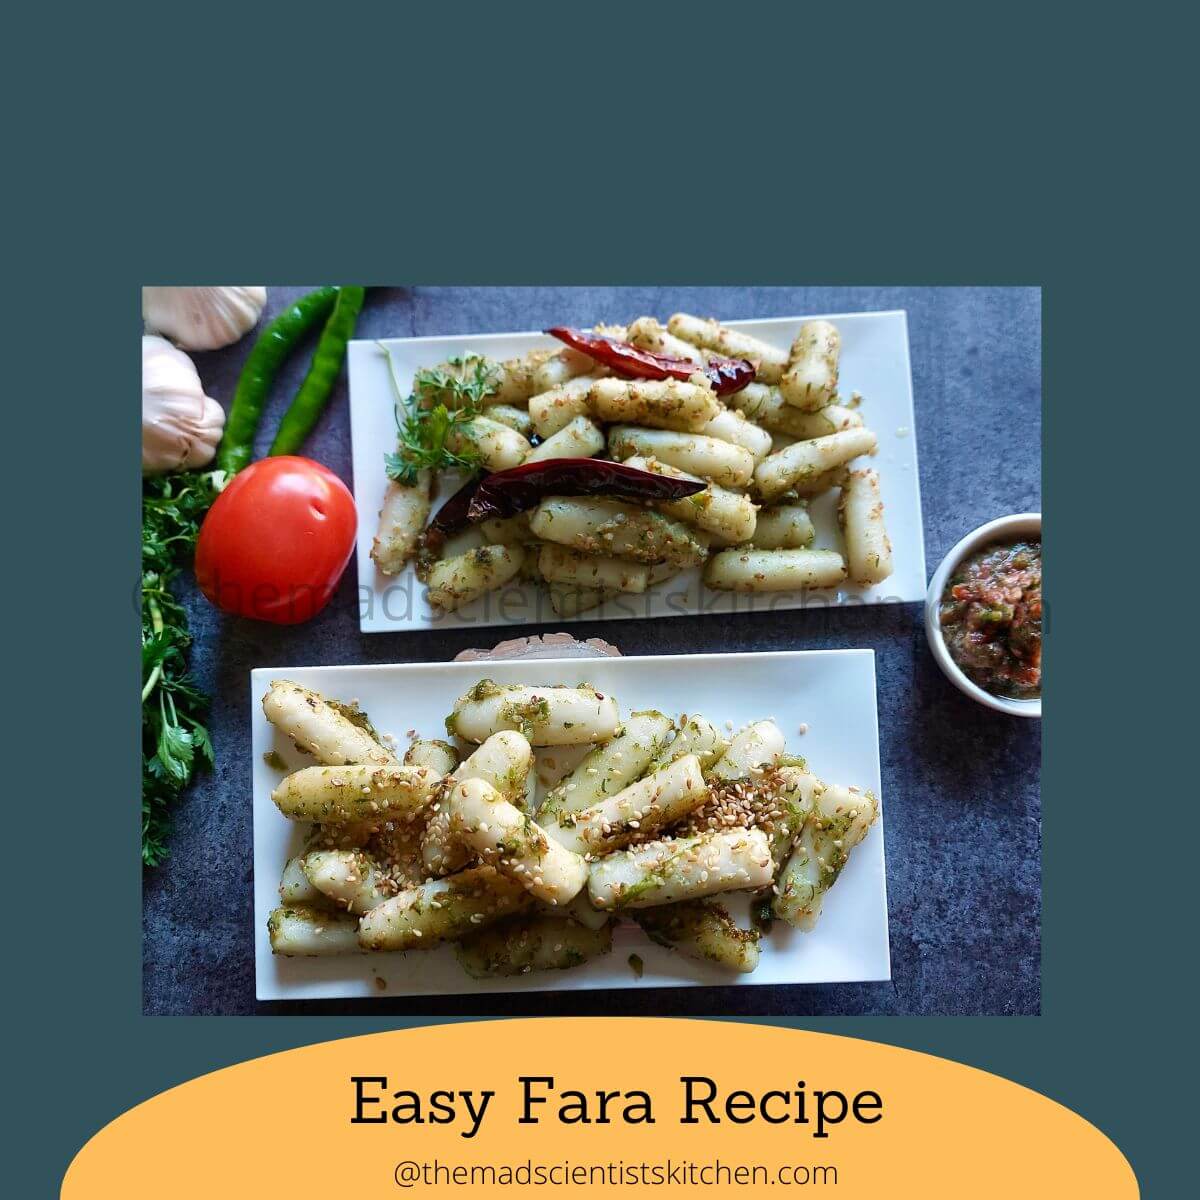 Fara, is enjoyed as a snack or breakfast meal made from rice. There are no special occasions for making it.